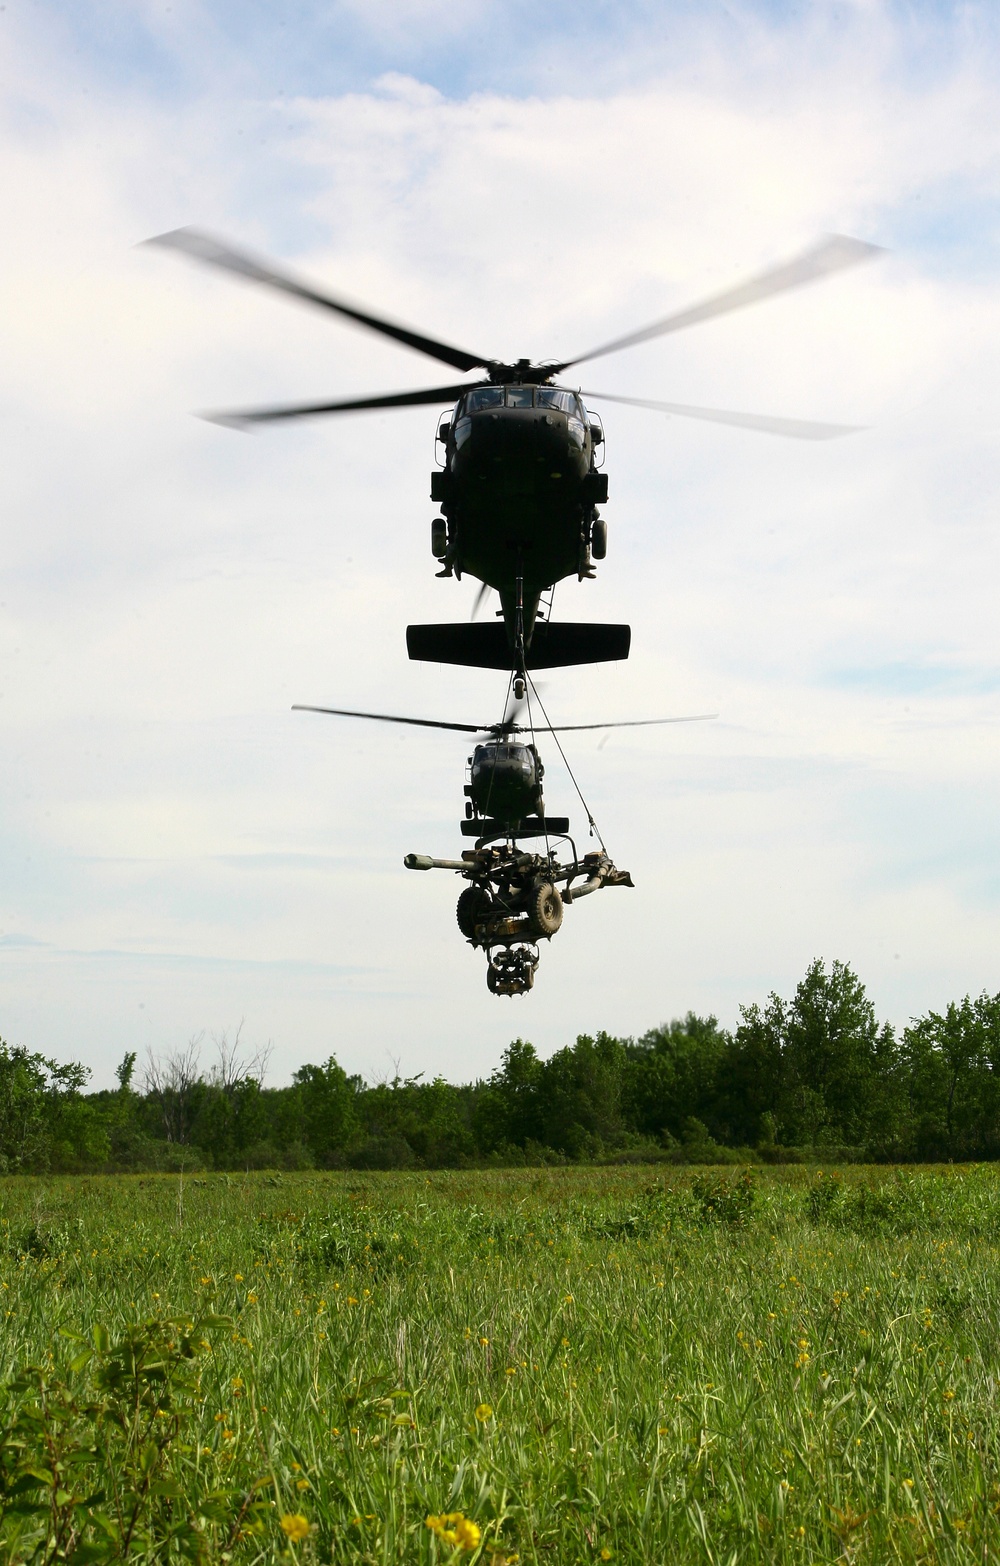 NY National Guard Soldiers train for artillery raid at Fort Drum